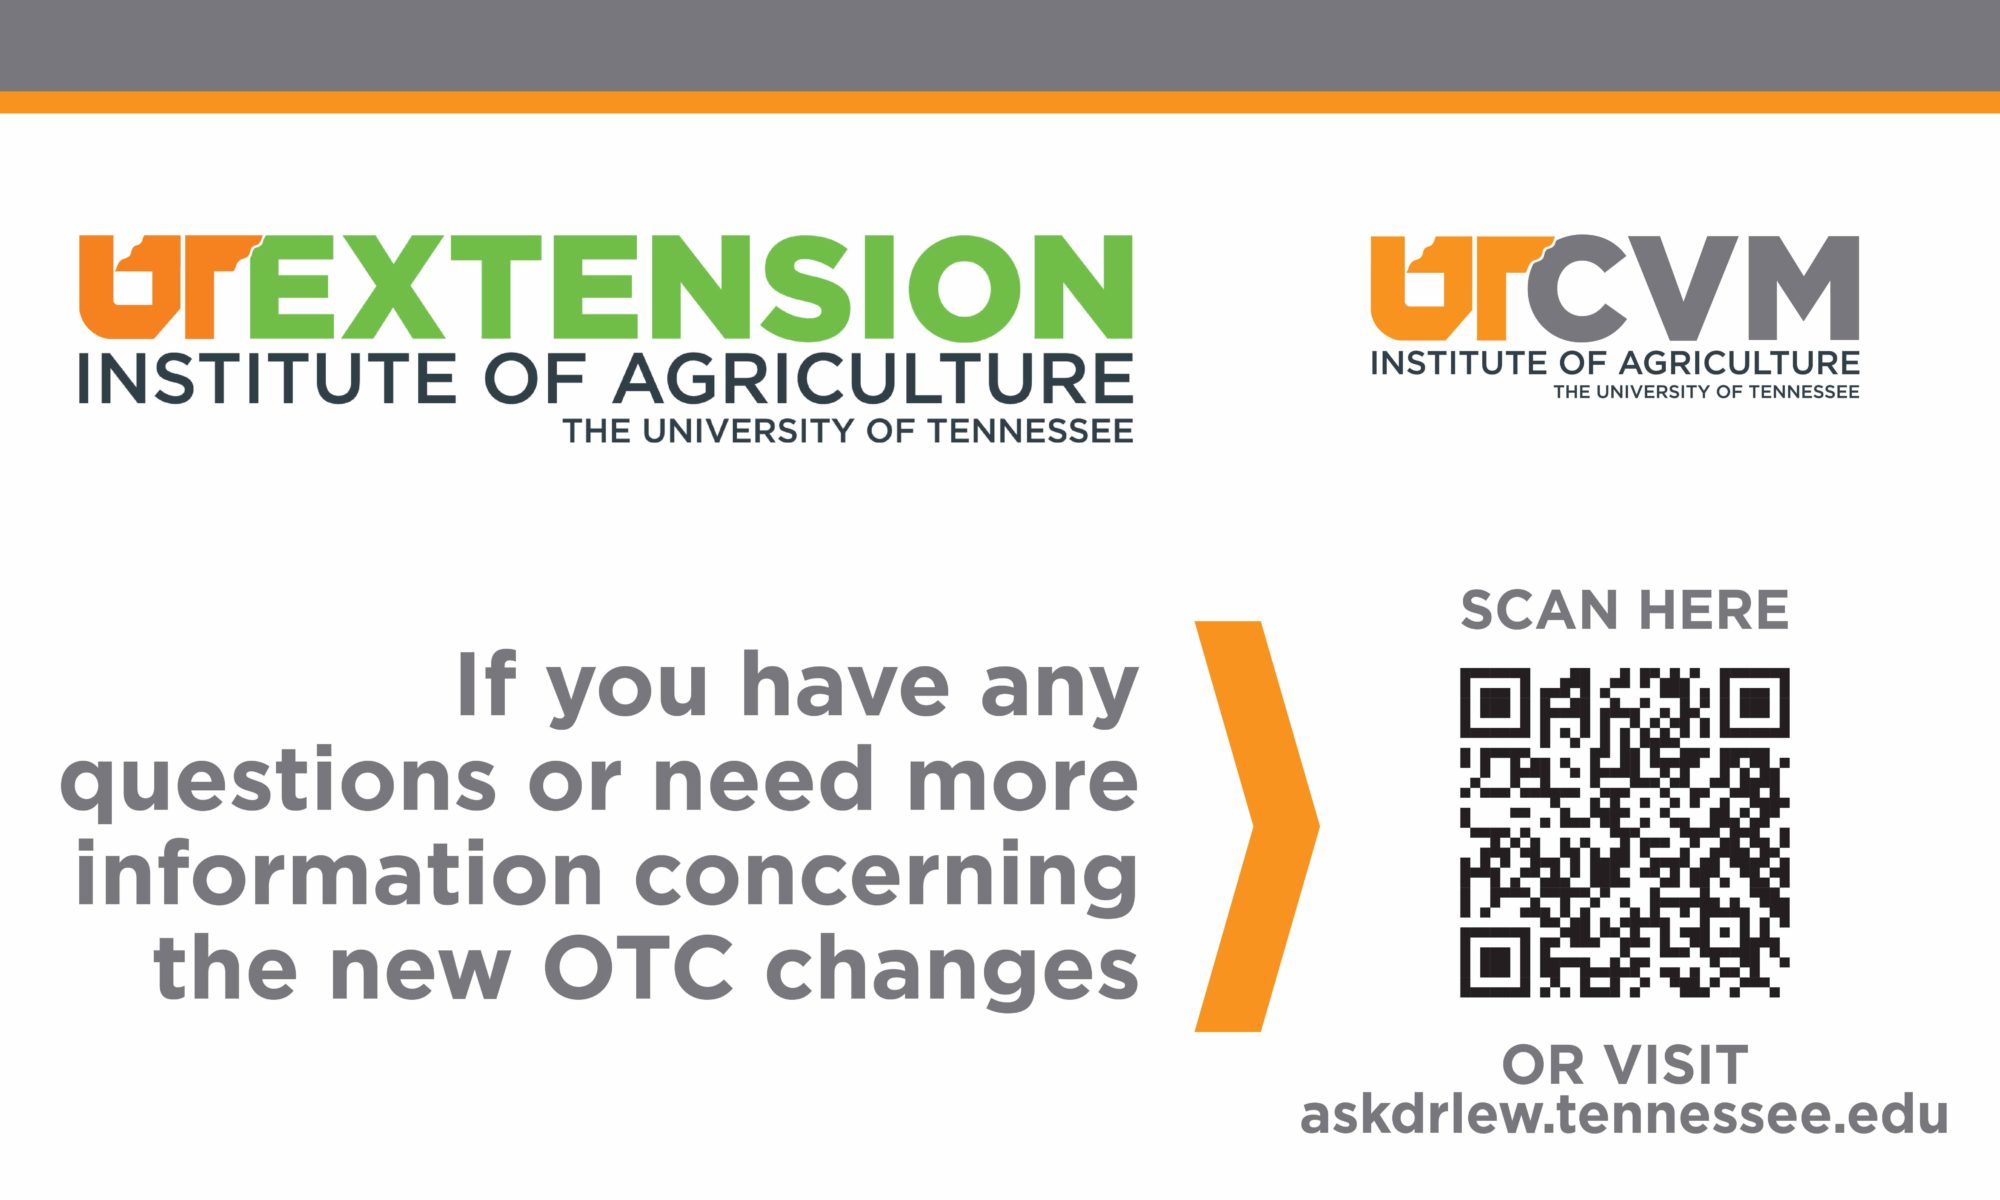 Slide showing logos of UT Extension and UT College of Veterinary Medicine and a QR code that goes to askdrlew.tennessee.edu